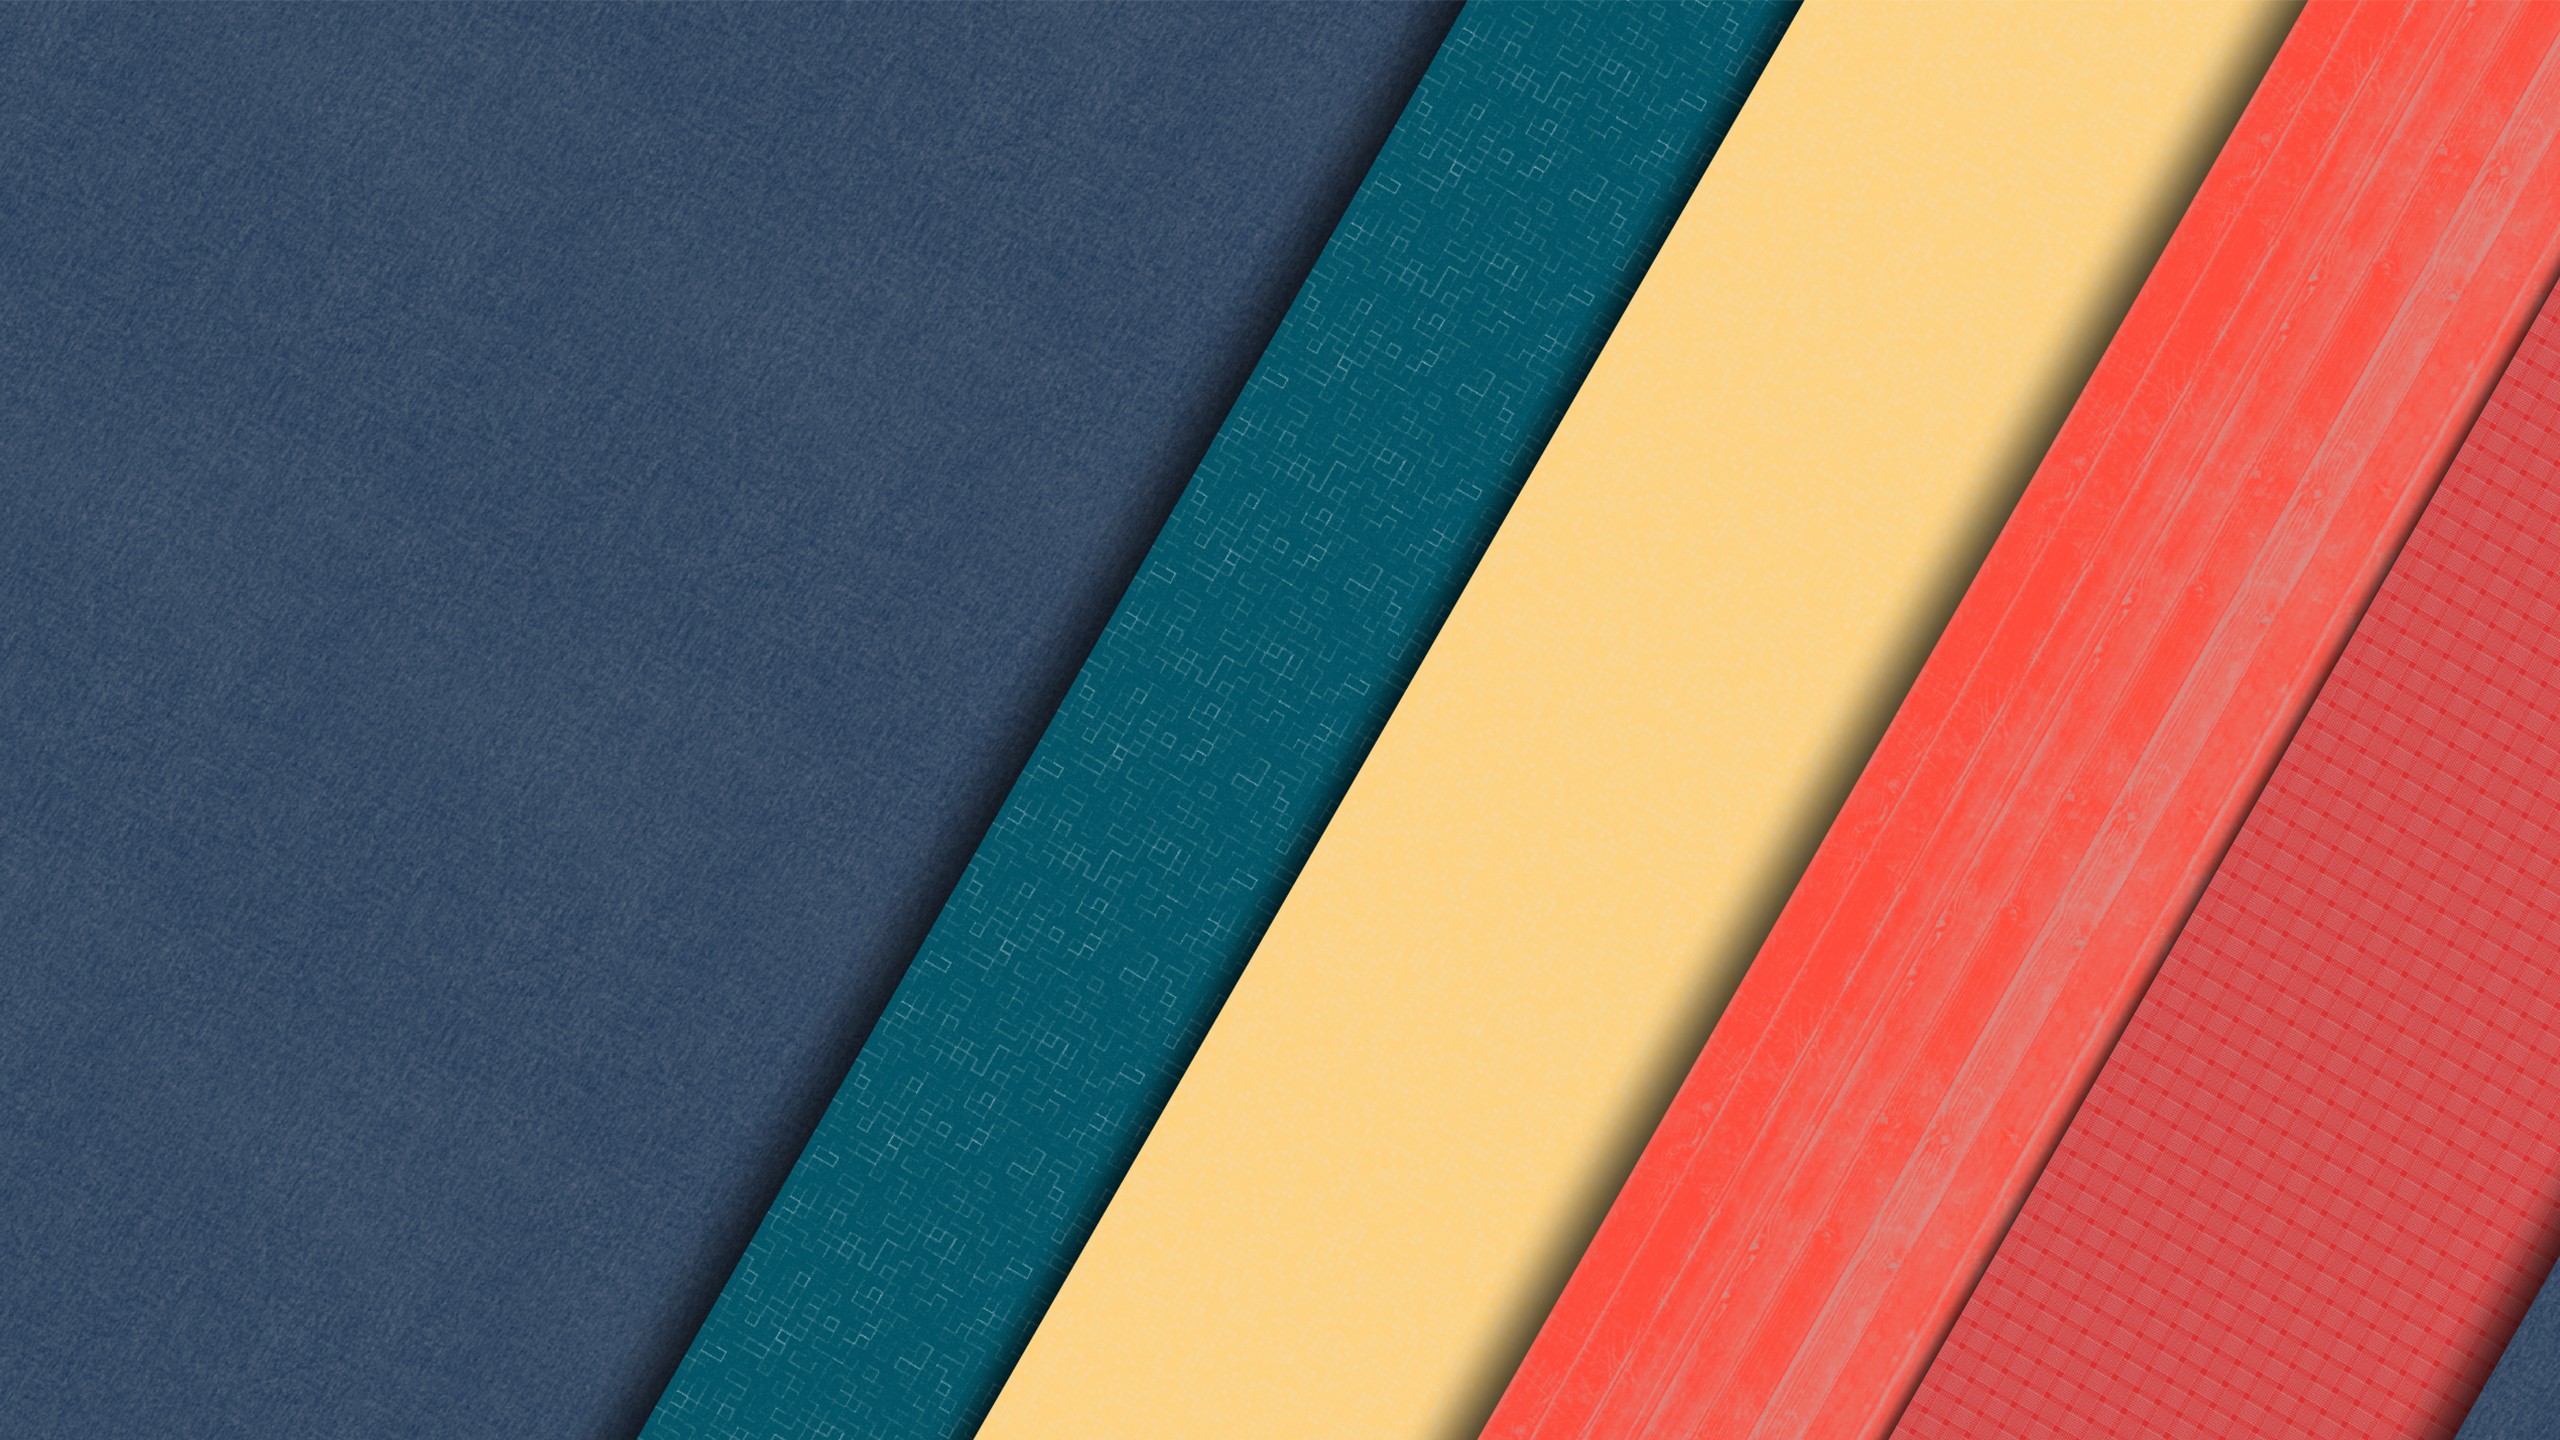 material design wallpapers desktop,blue,red,yellow,turquoise,textile